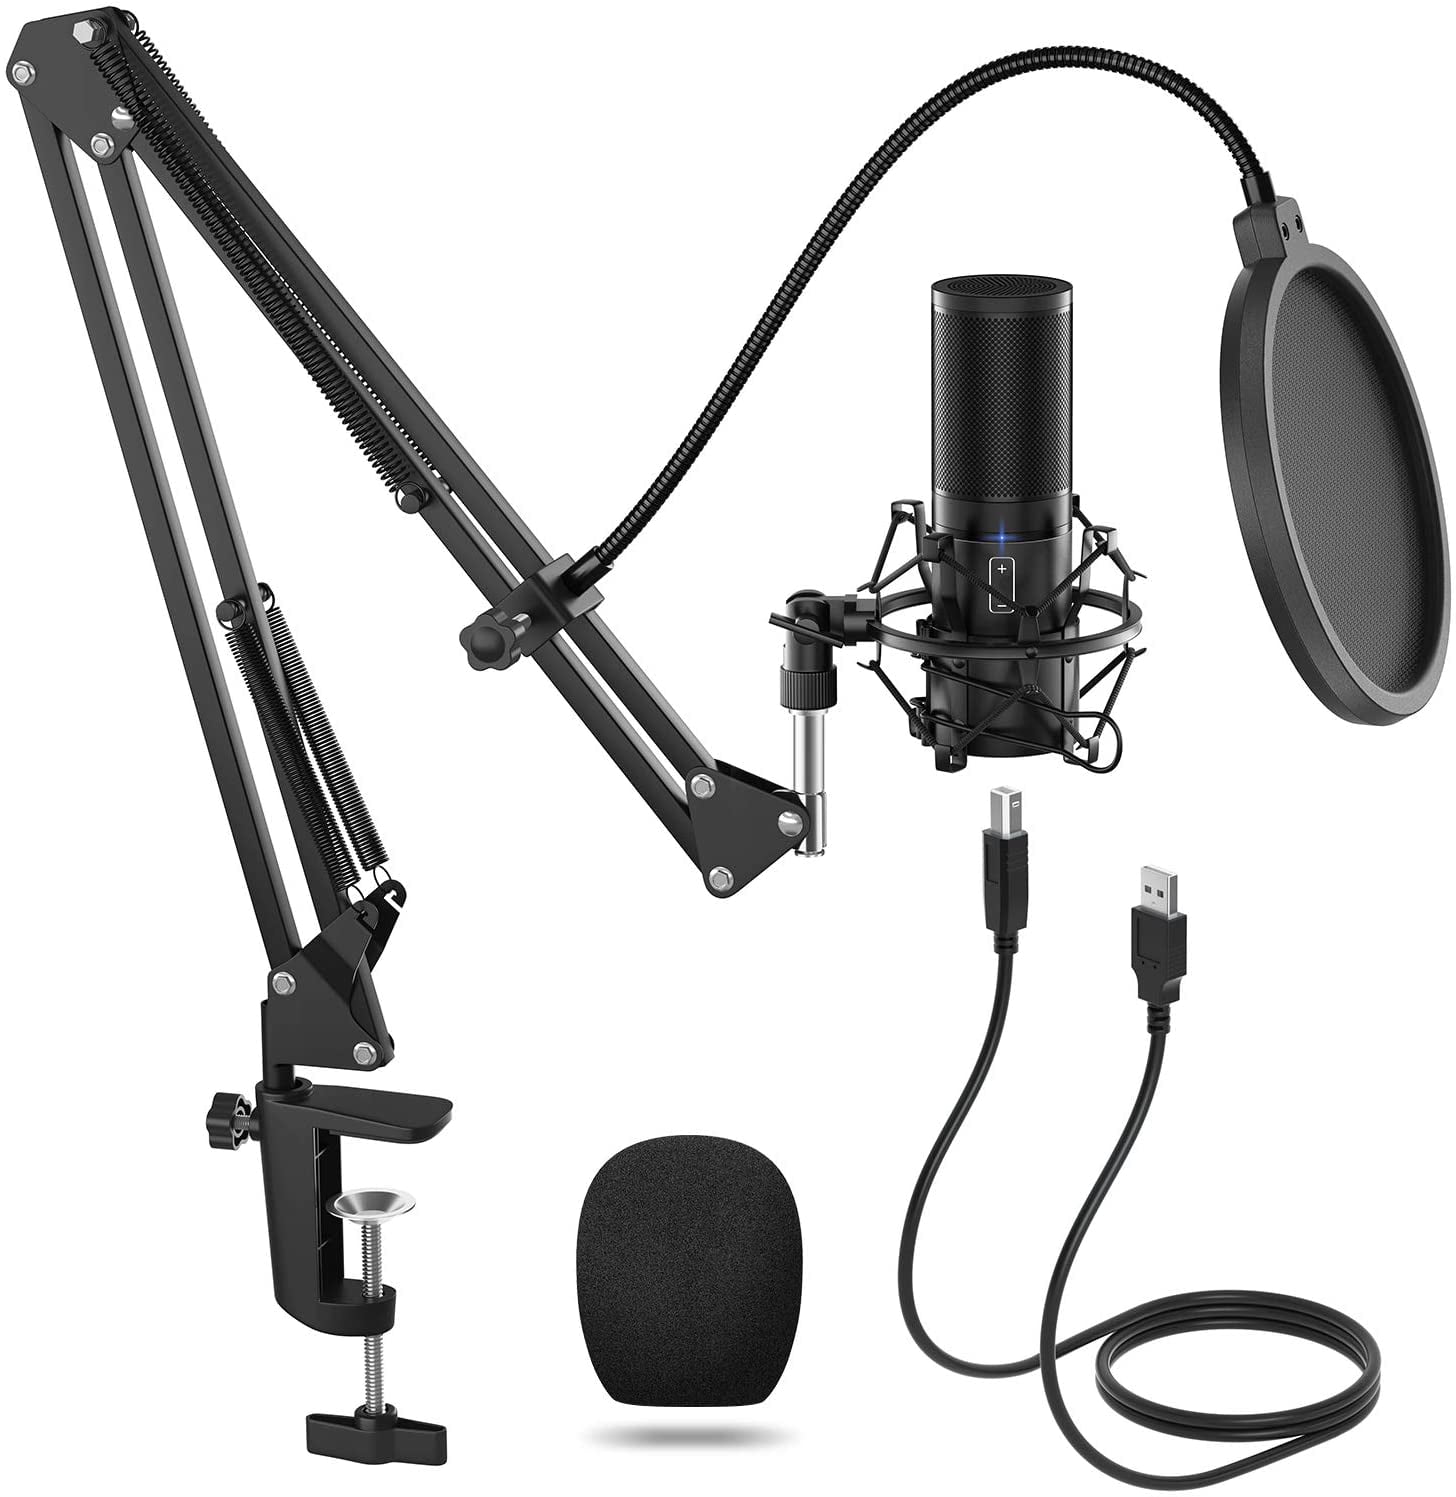 Studio Condenser USB Microphone Computer PC Microphone Kit by VORMOR with Adjustable Scissor Arm Stand Shock Mount for Instruments Voice Overs Recording Podcasting YouTube Karaoke Gaming Streaming